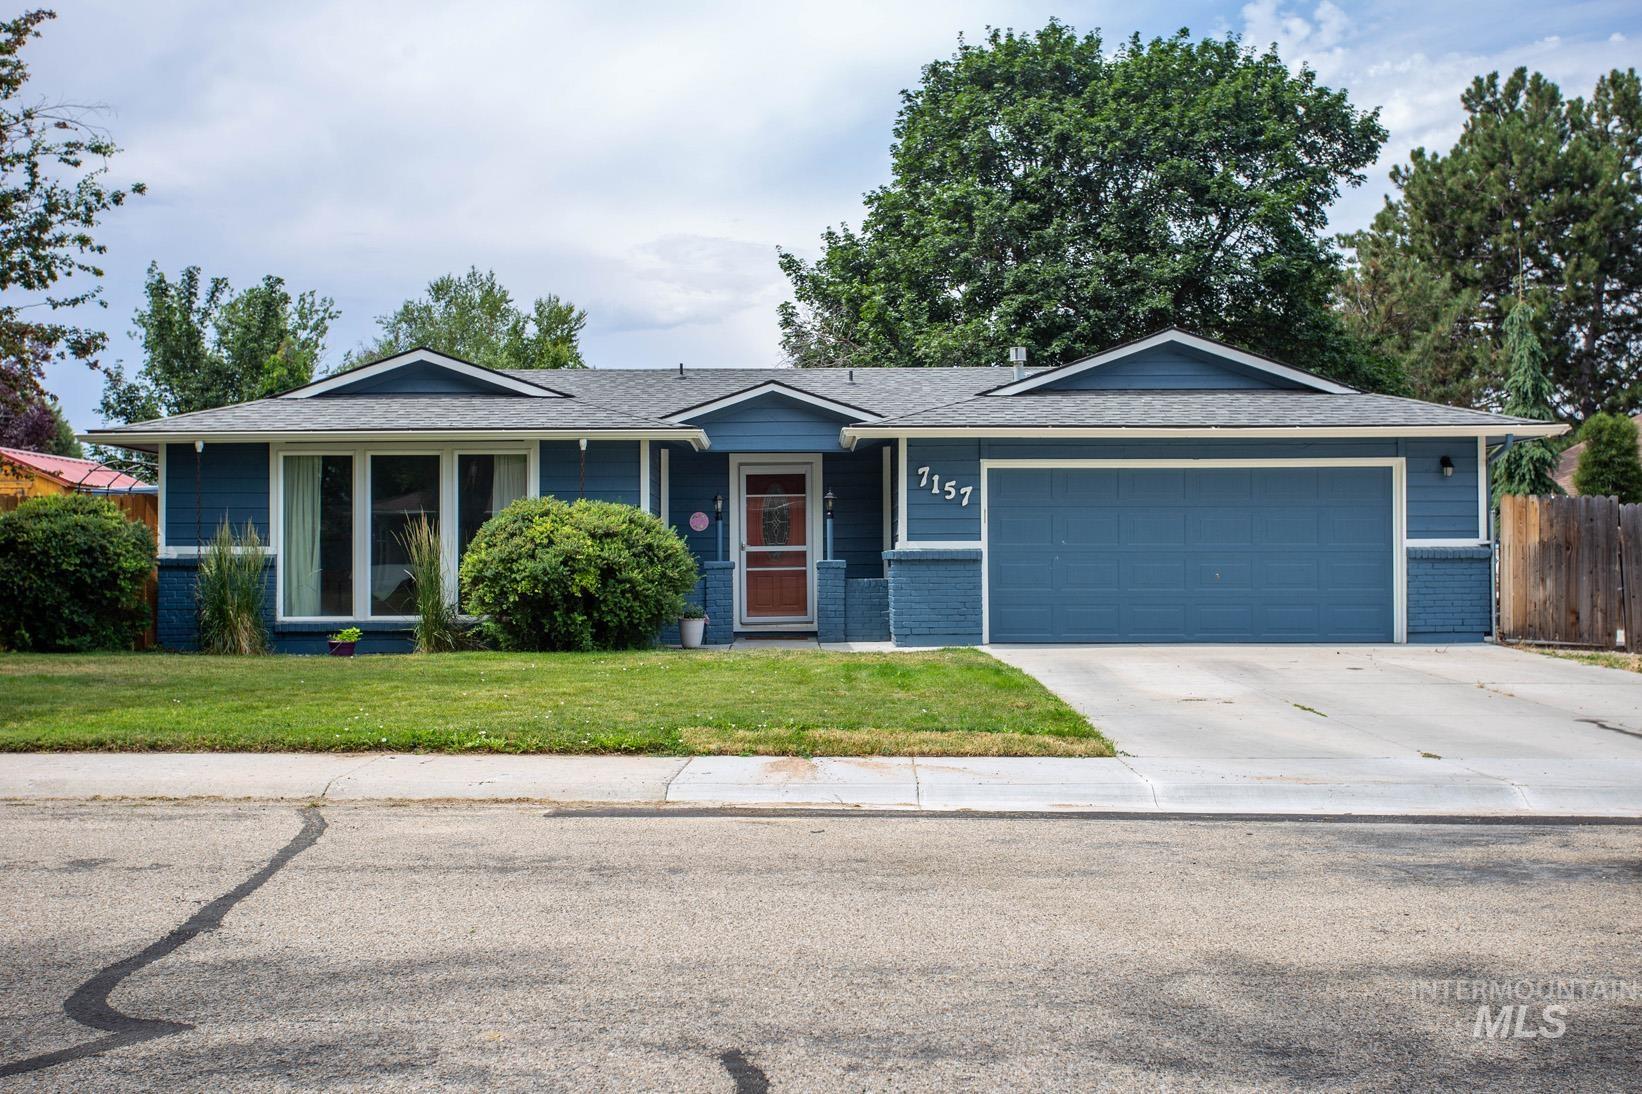 7157 Chilacot, Boise, Idaho 83709, 3 Bedrooms, 2 Bathrooms, Residential For Sale, Price $409,900,MLS 98851360